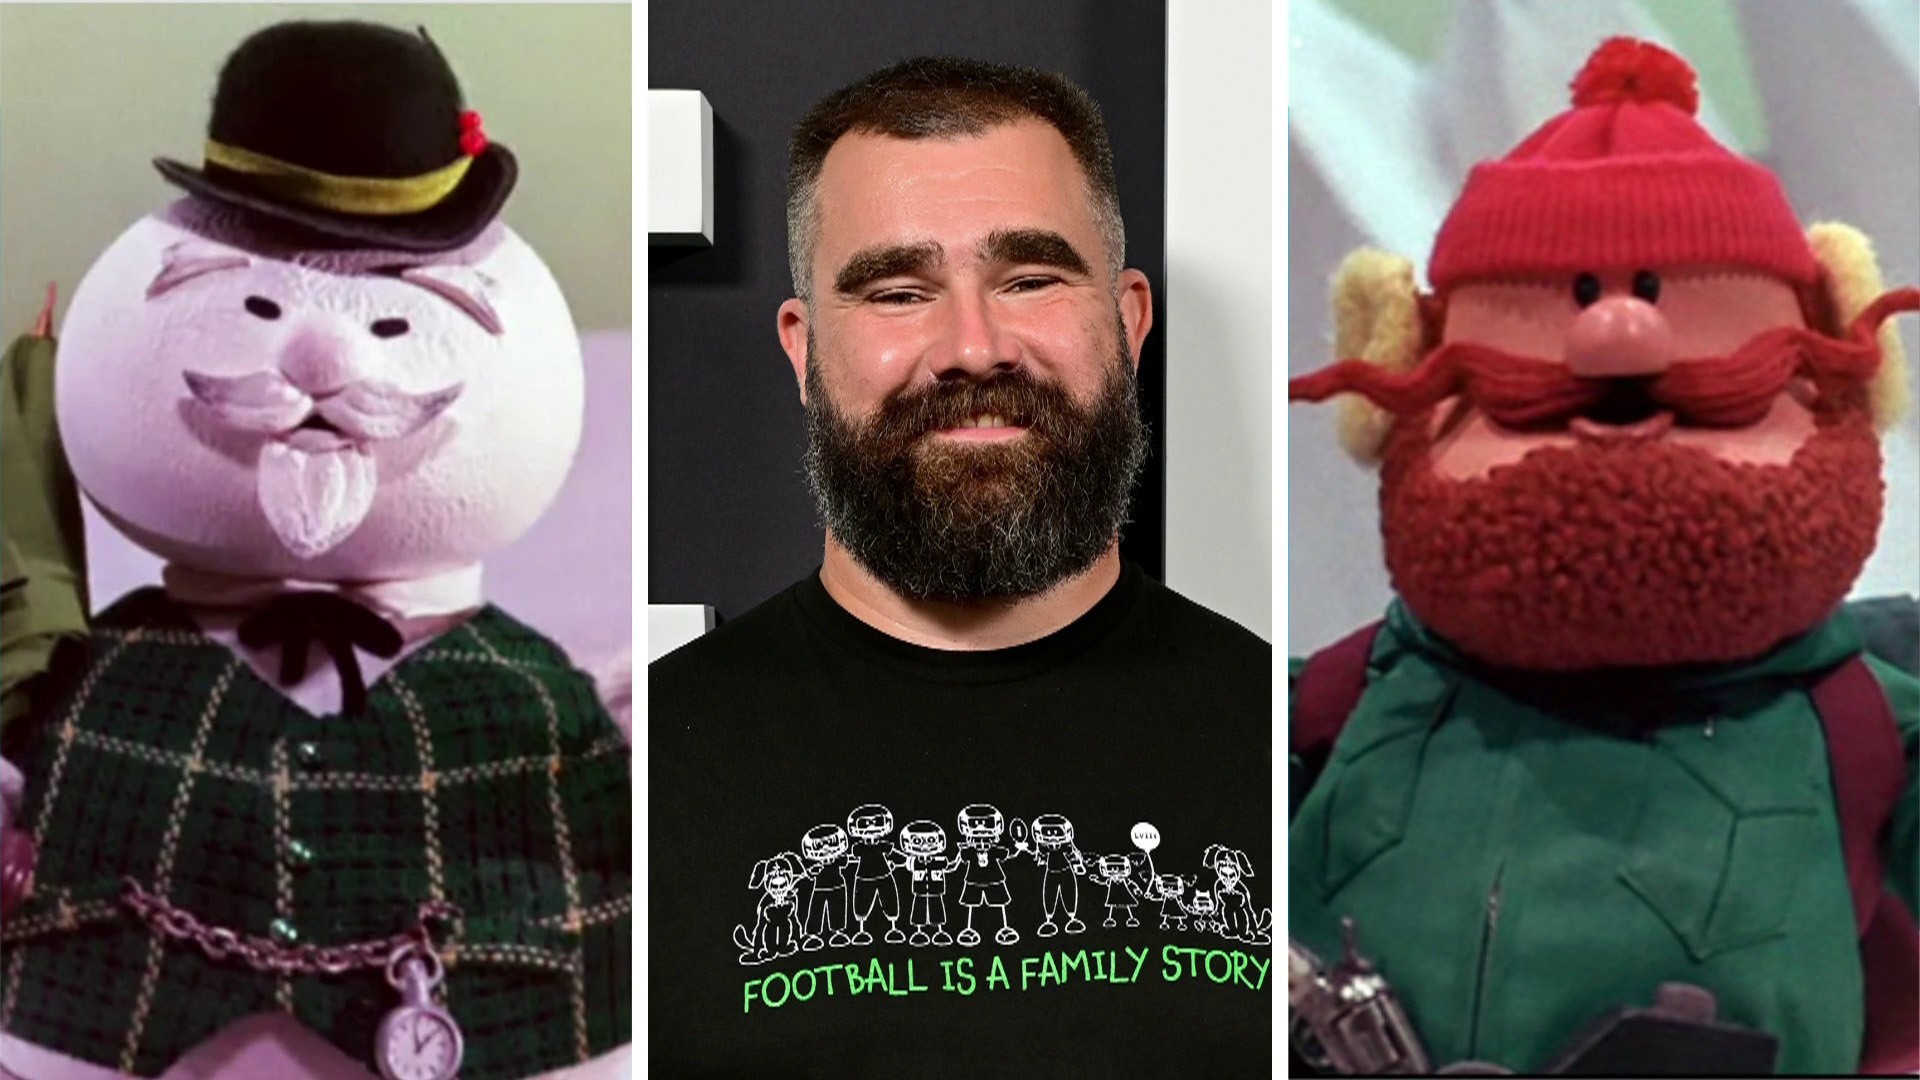 Jason Kelce weighs in on Sam the Snowman doppelgänger claims